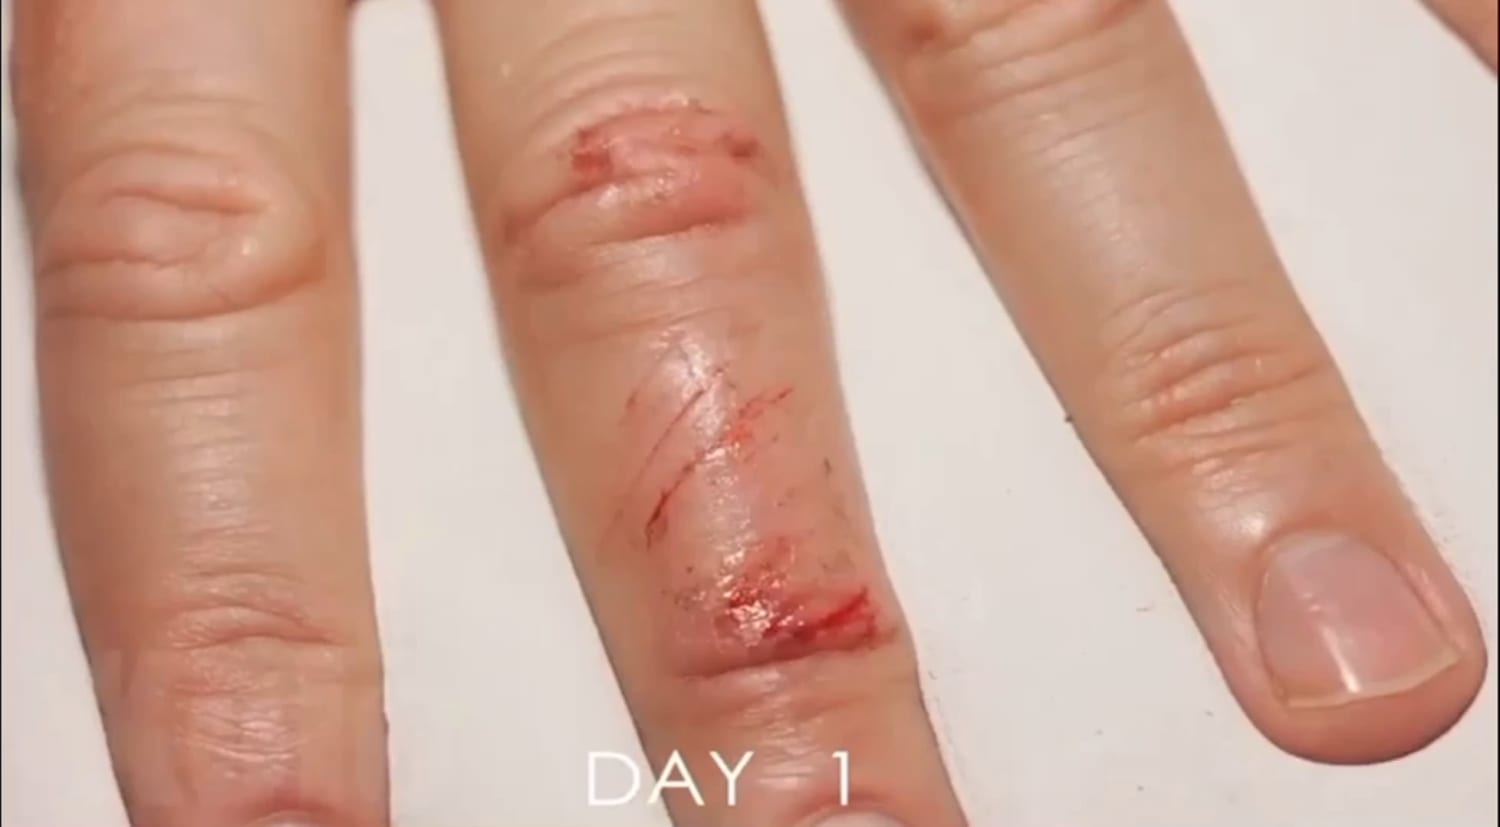 Time lapse of healing wound